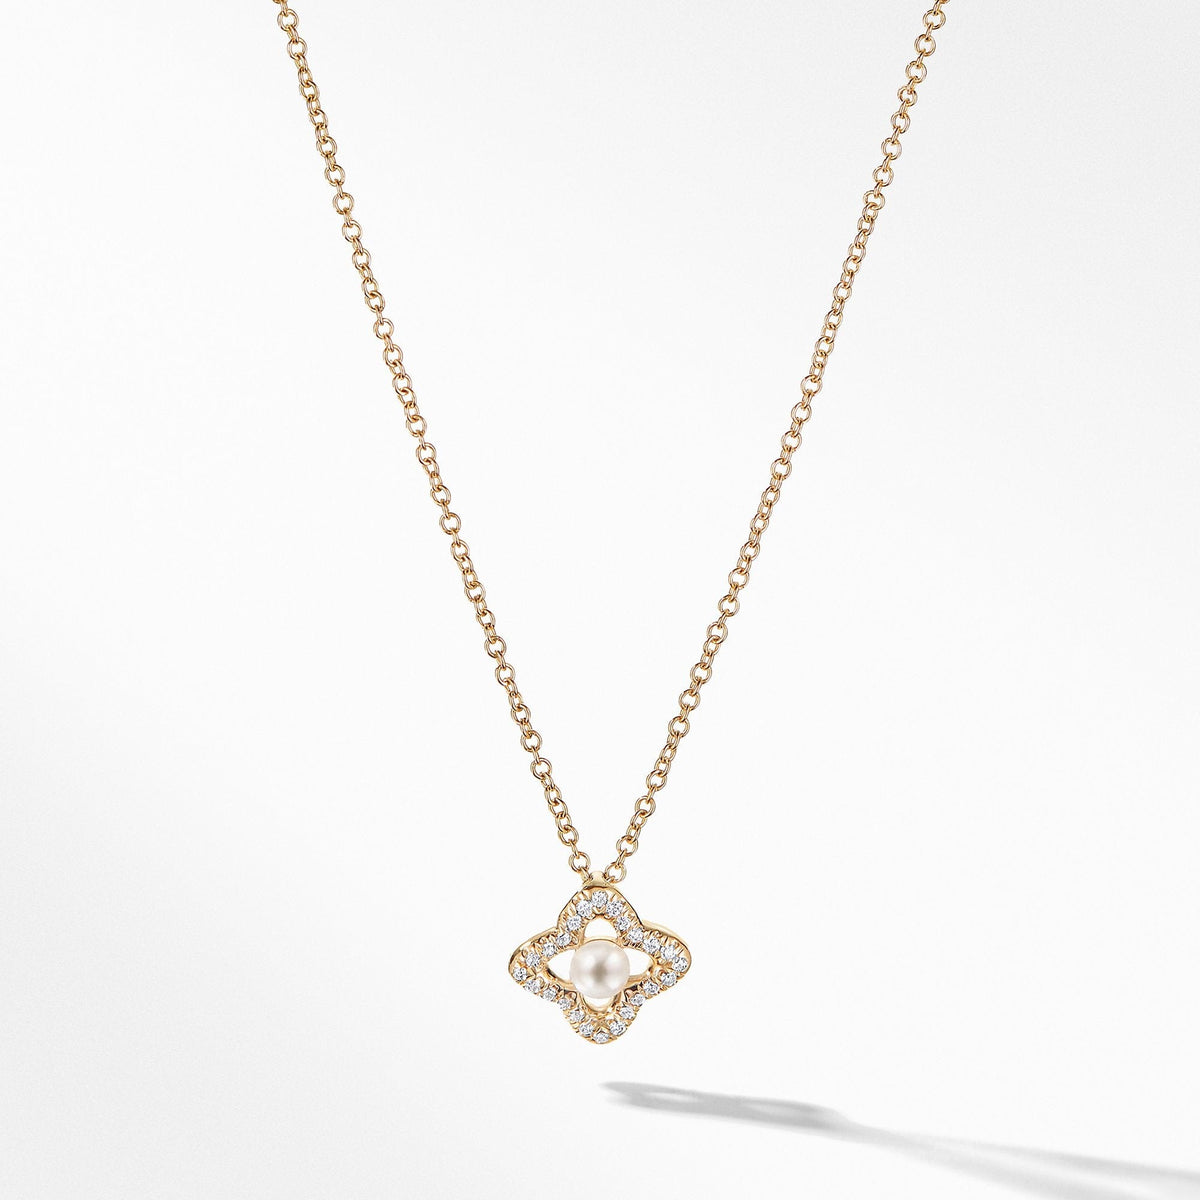 Venetian Quatrefoil® Necklace with Pearl and Diamonds in 18K Gold